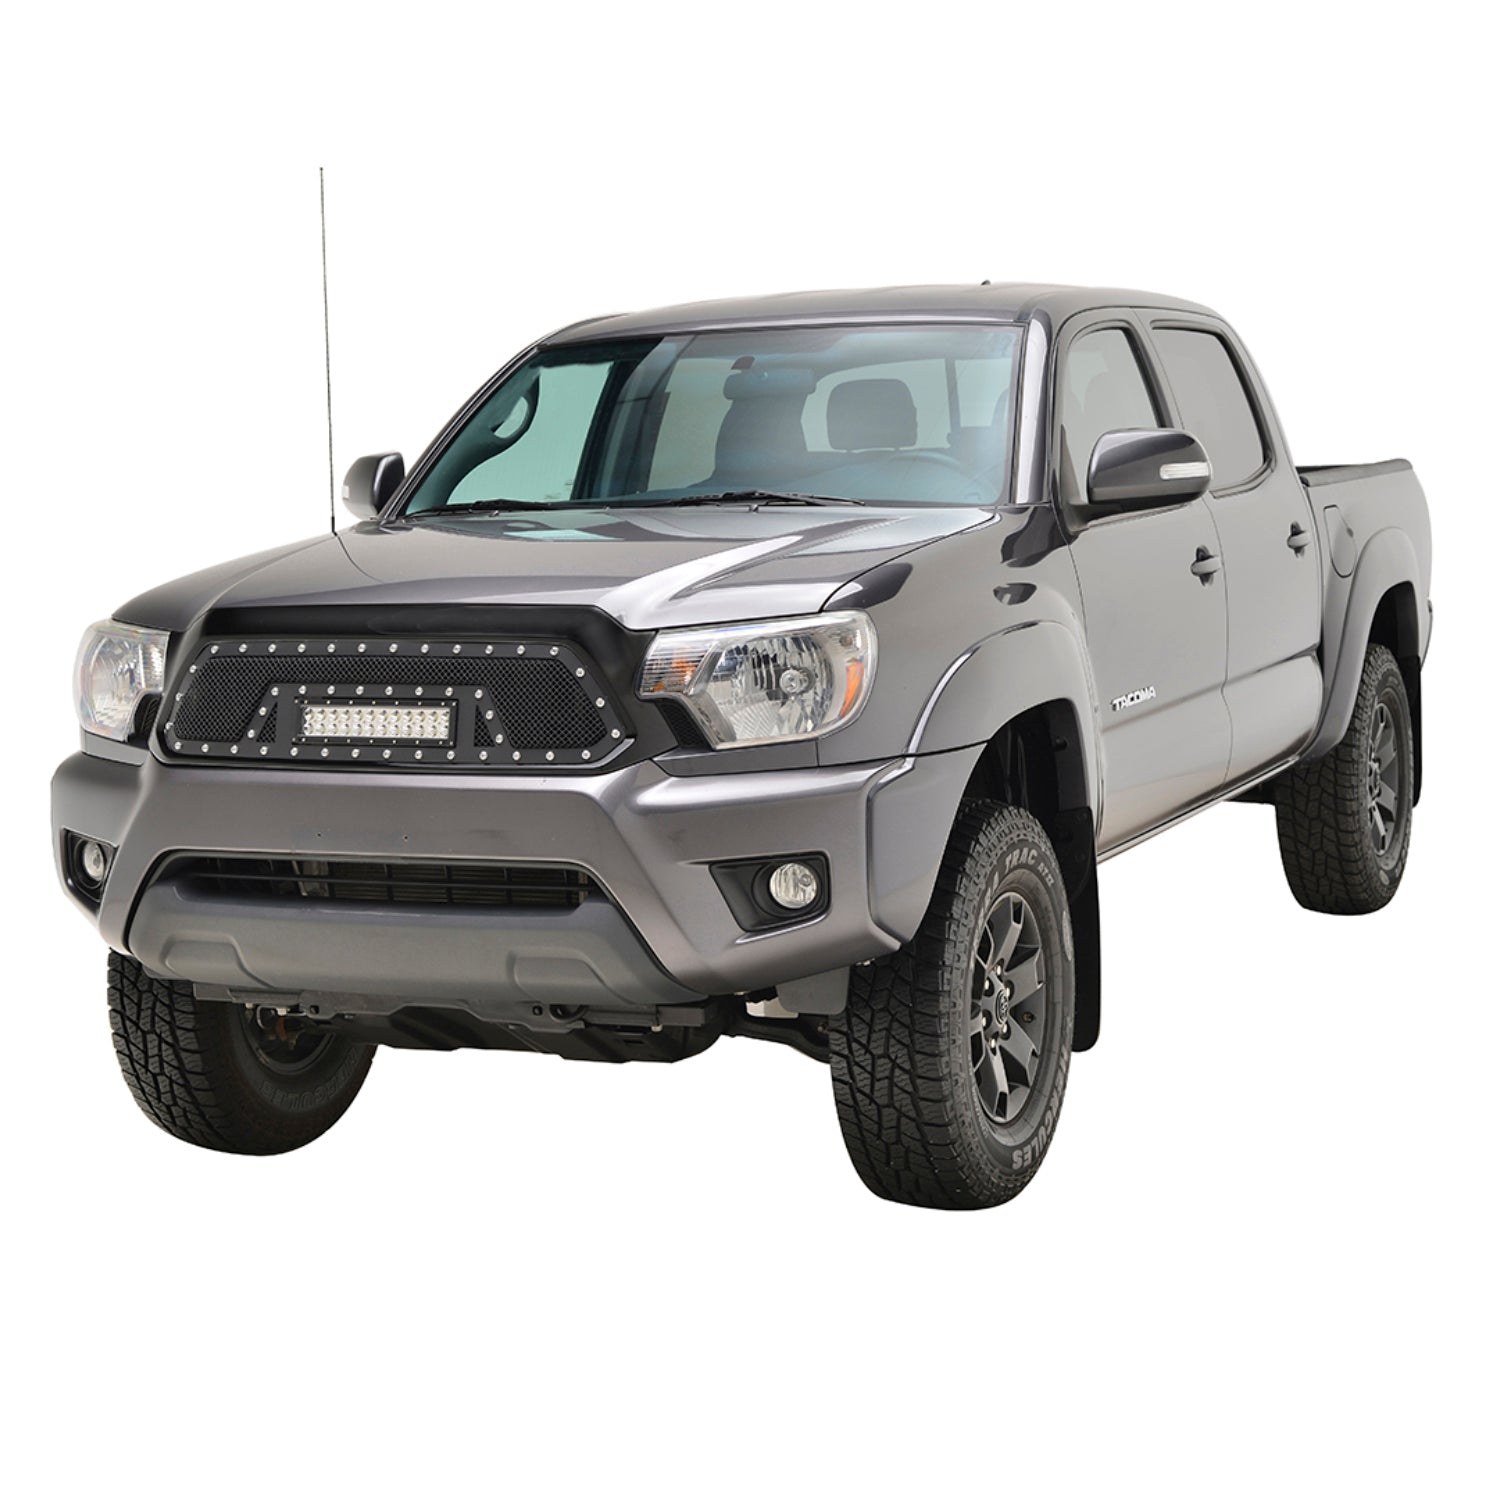 12-15 Toyota Tacoma Evolution Matte Black Stainless Steel Grille (48-0855)